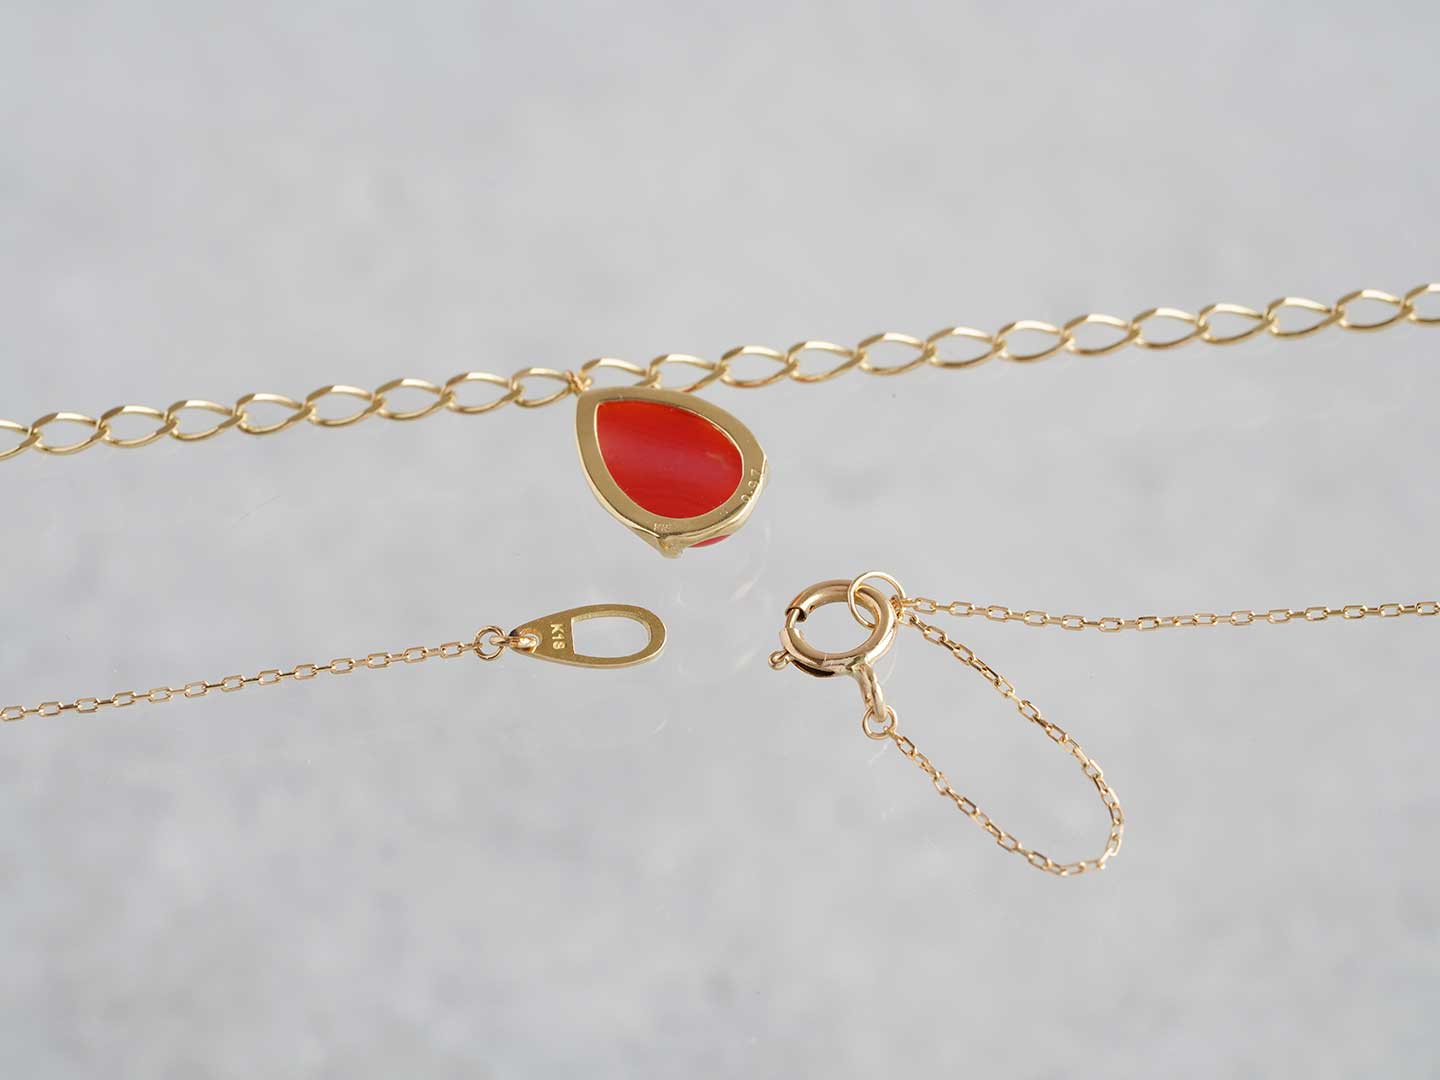 Red coral long necklace 0.97 /赤珊瑚（コーラル）